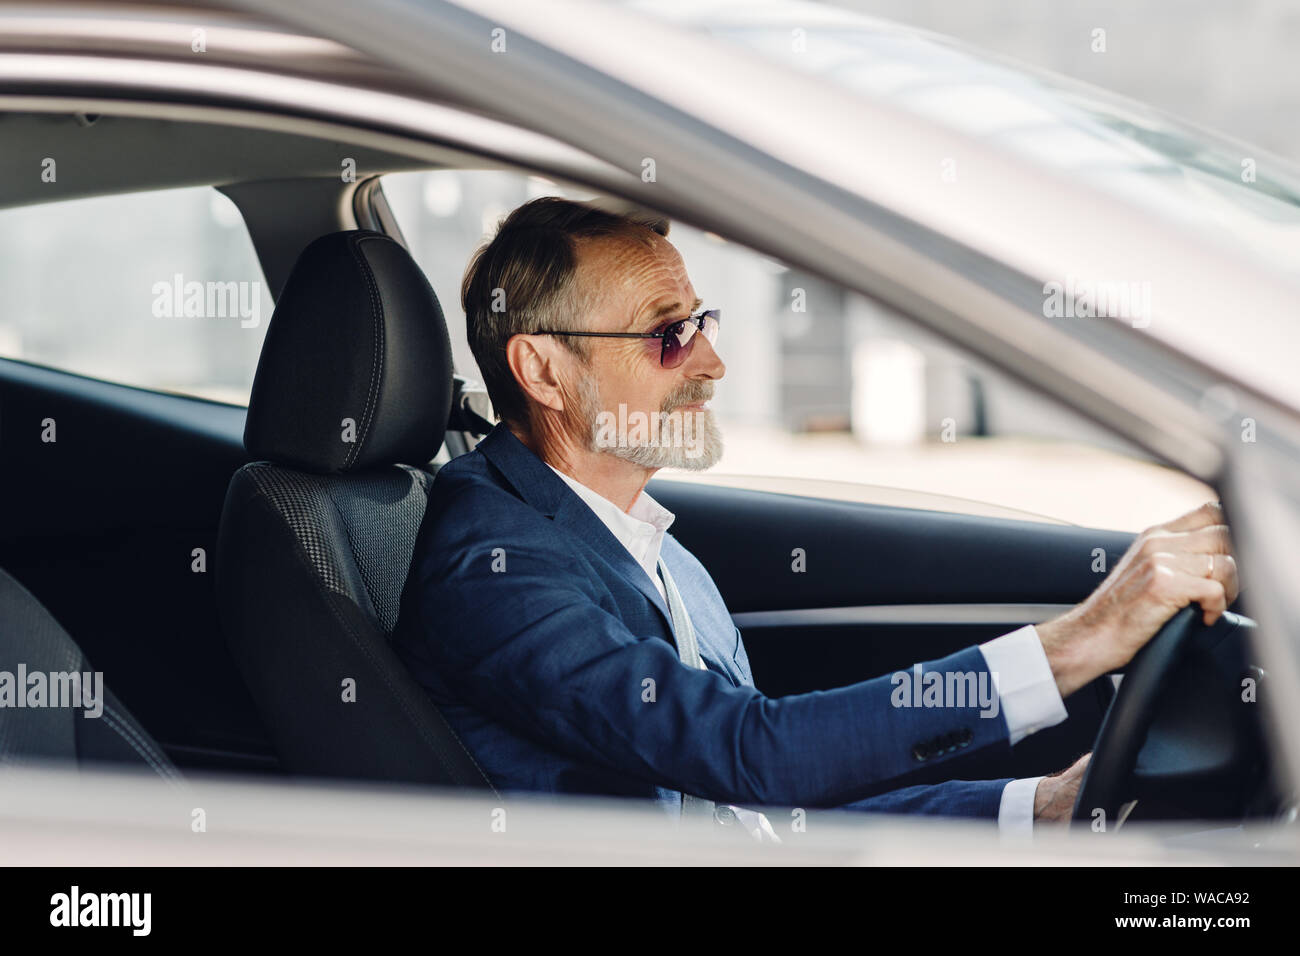 Senior businessman driving a car. Side view of a man in formal wear sitting in the vehicle. Stock Photo